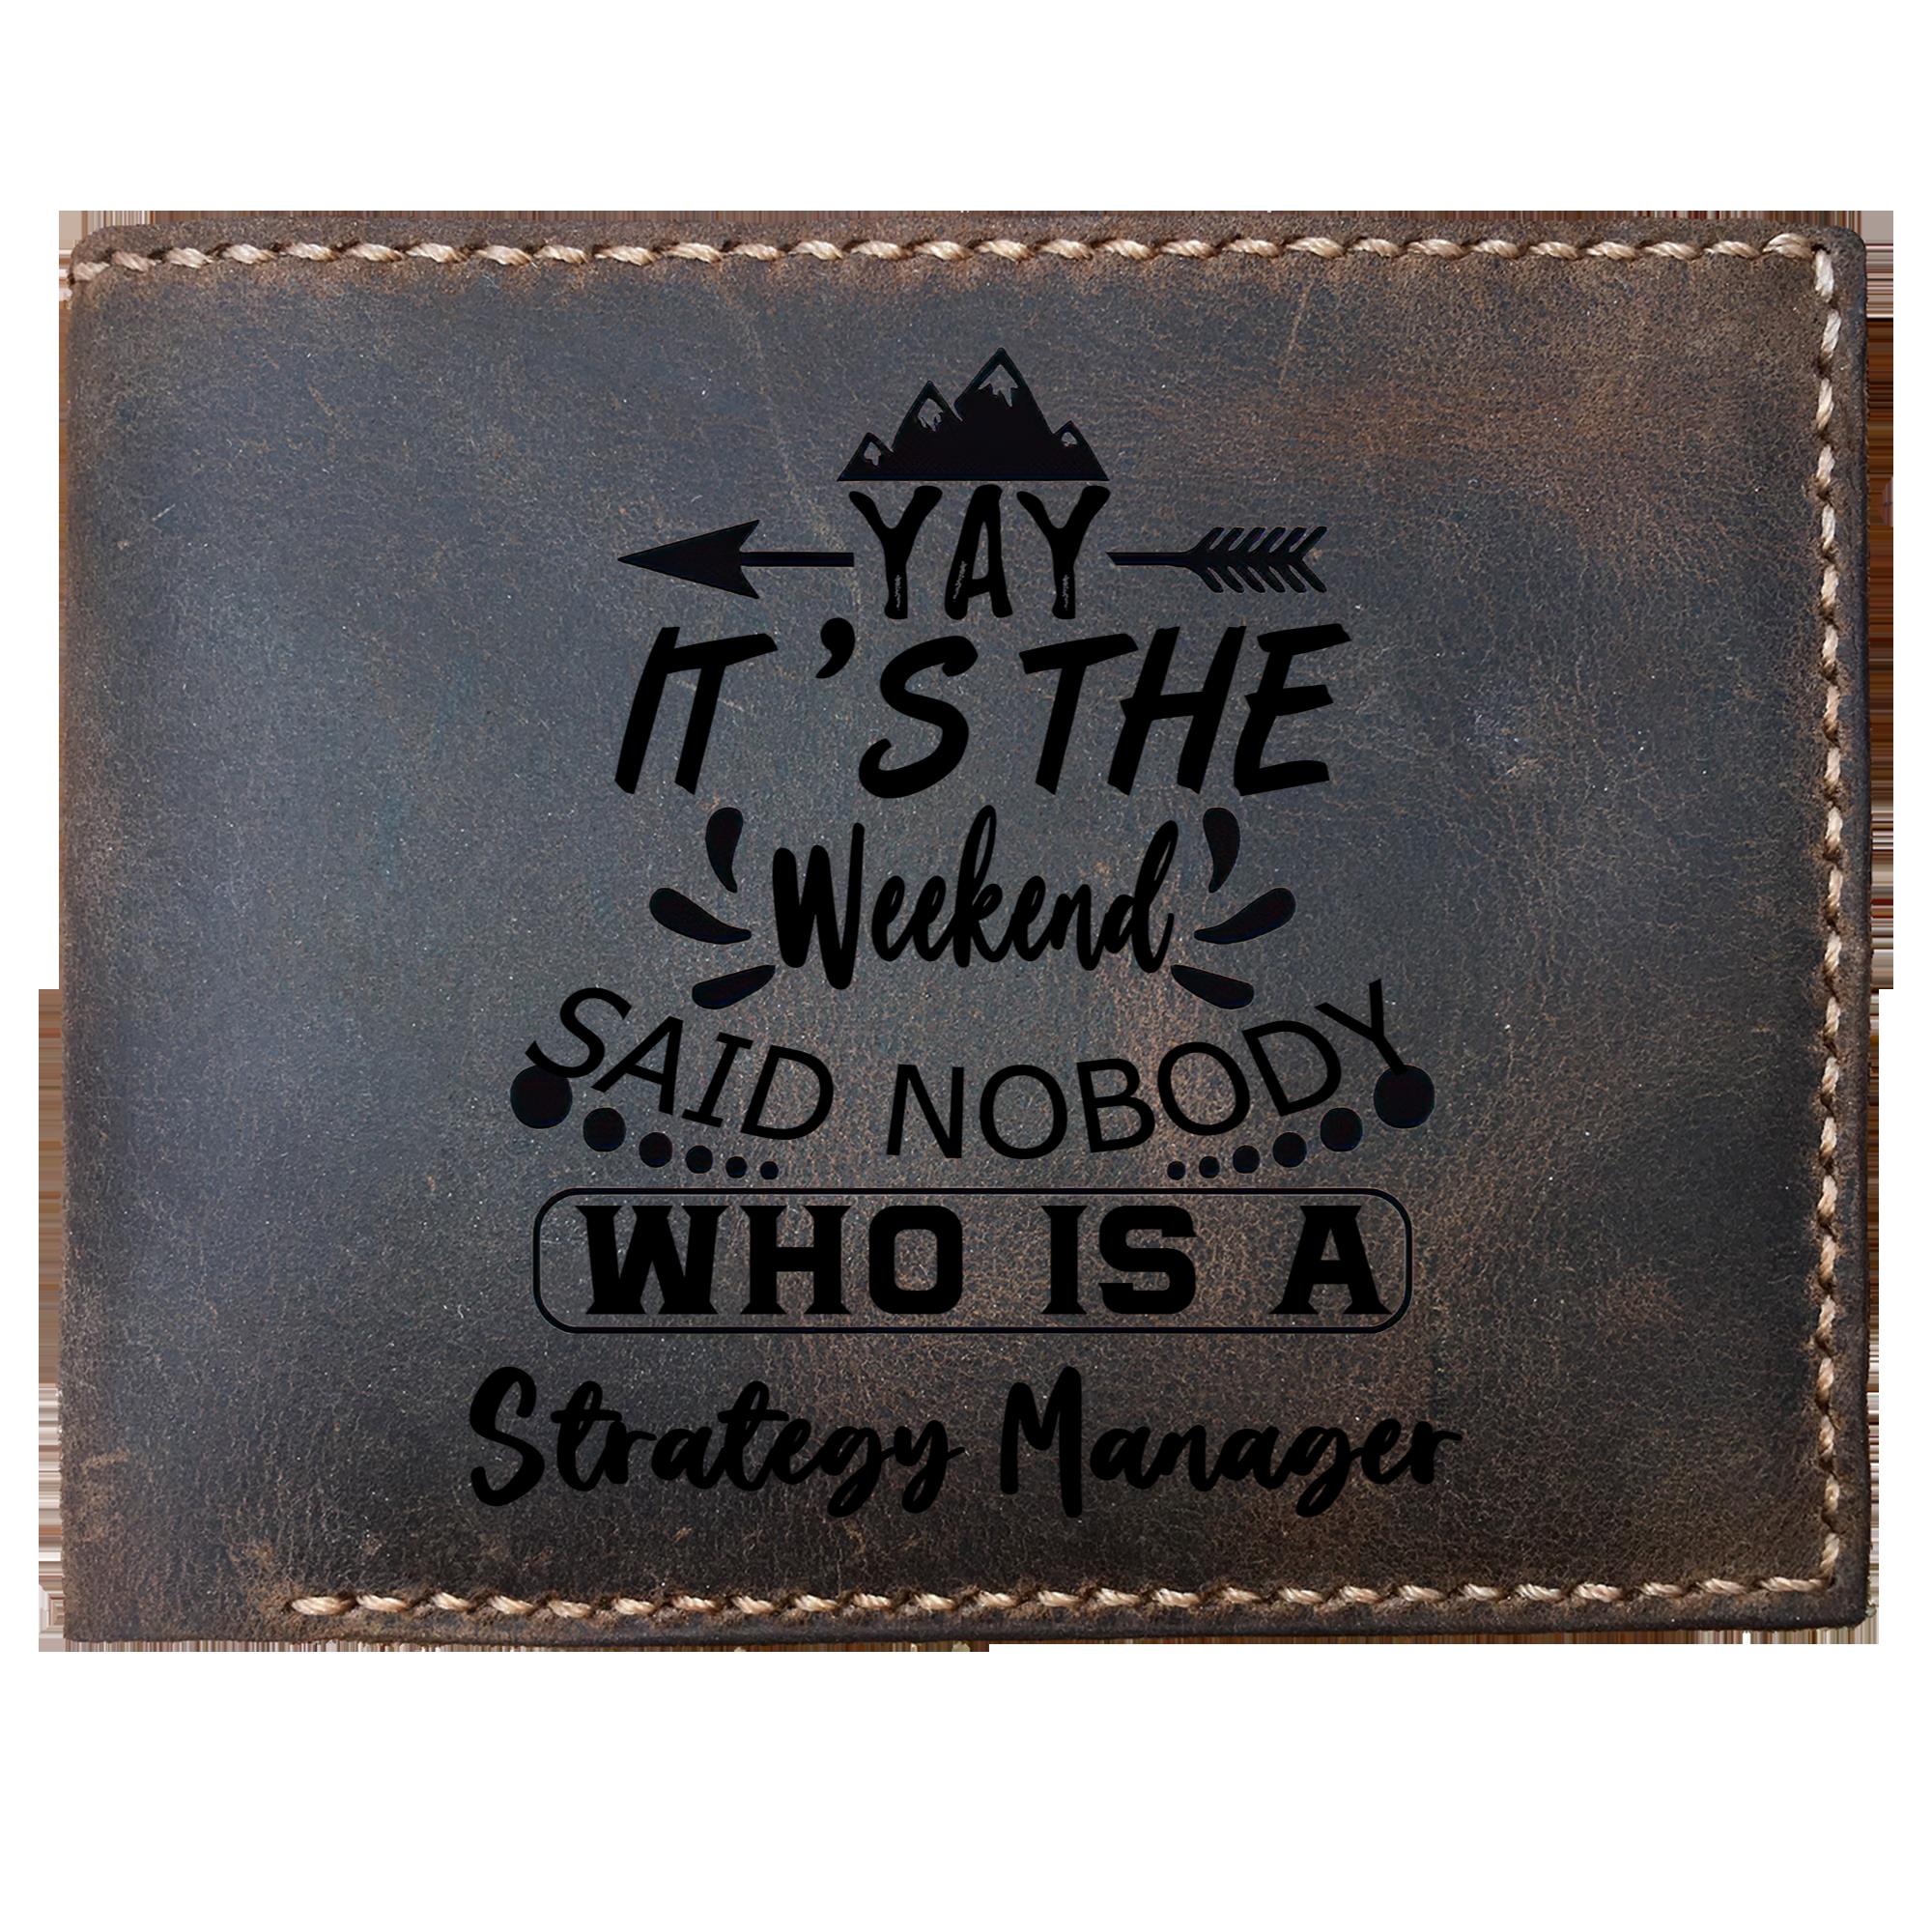 Skitongifts Funny Custom Laser Engraved Bifold Leather Wallet For Men, It's The Weekend Said Nobody Who Is A Strategy Manager, Father's Day Gifts